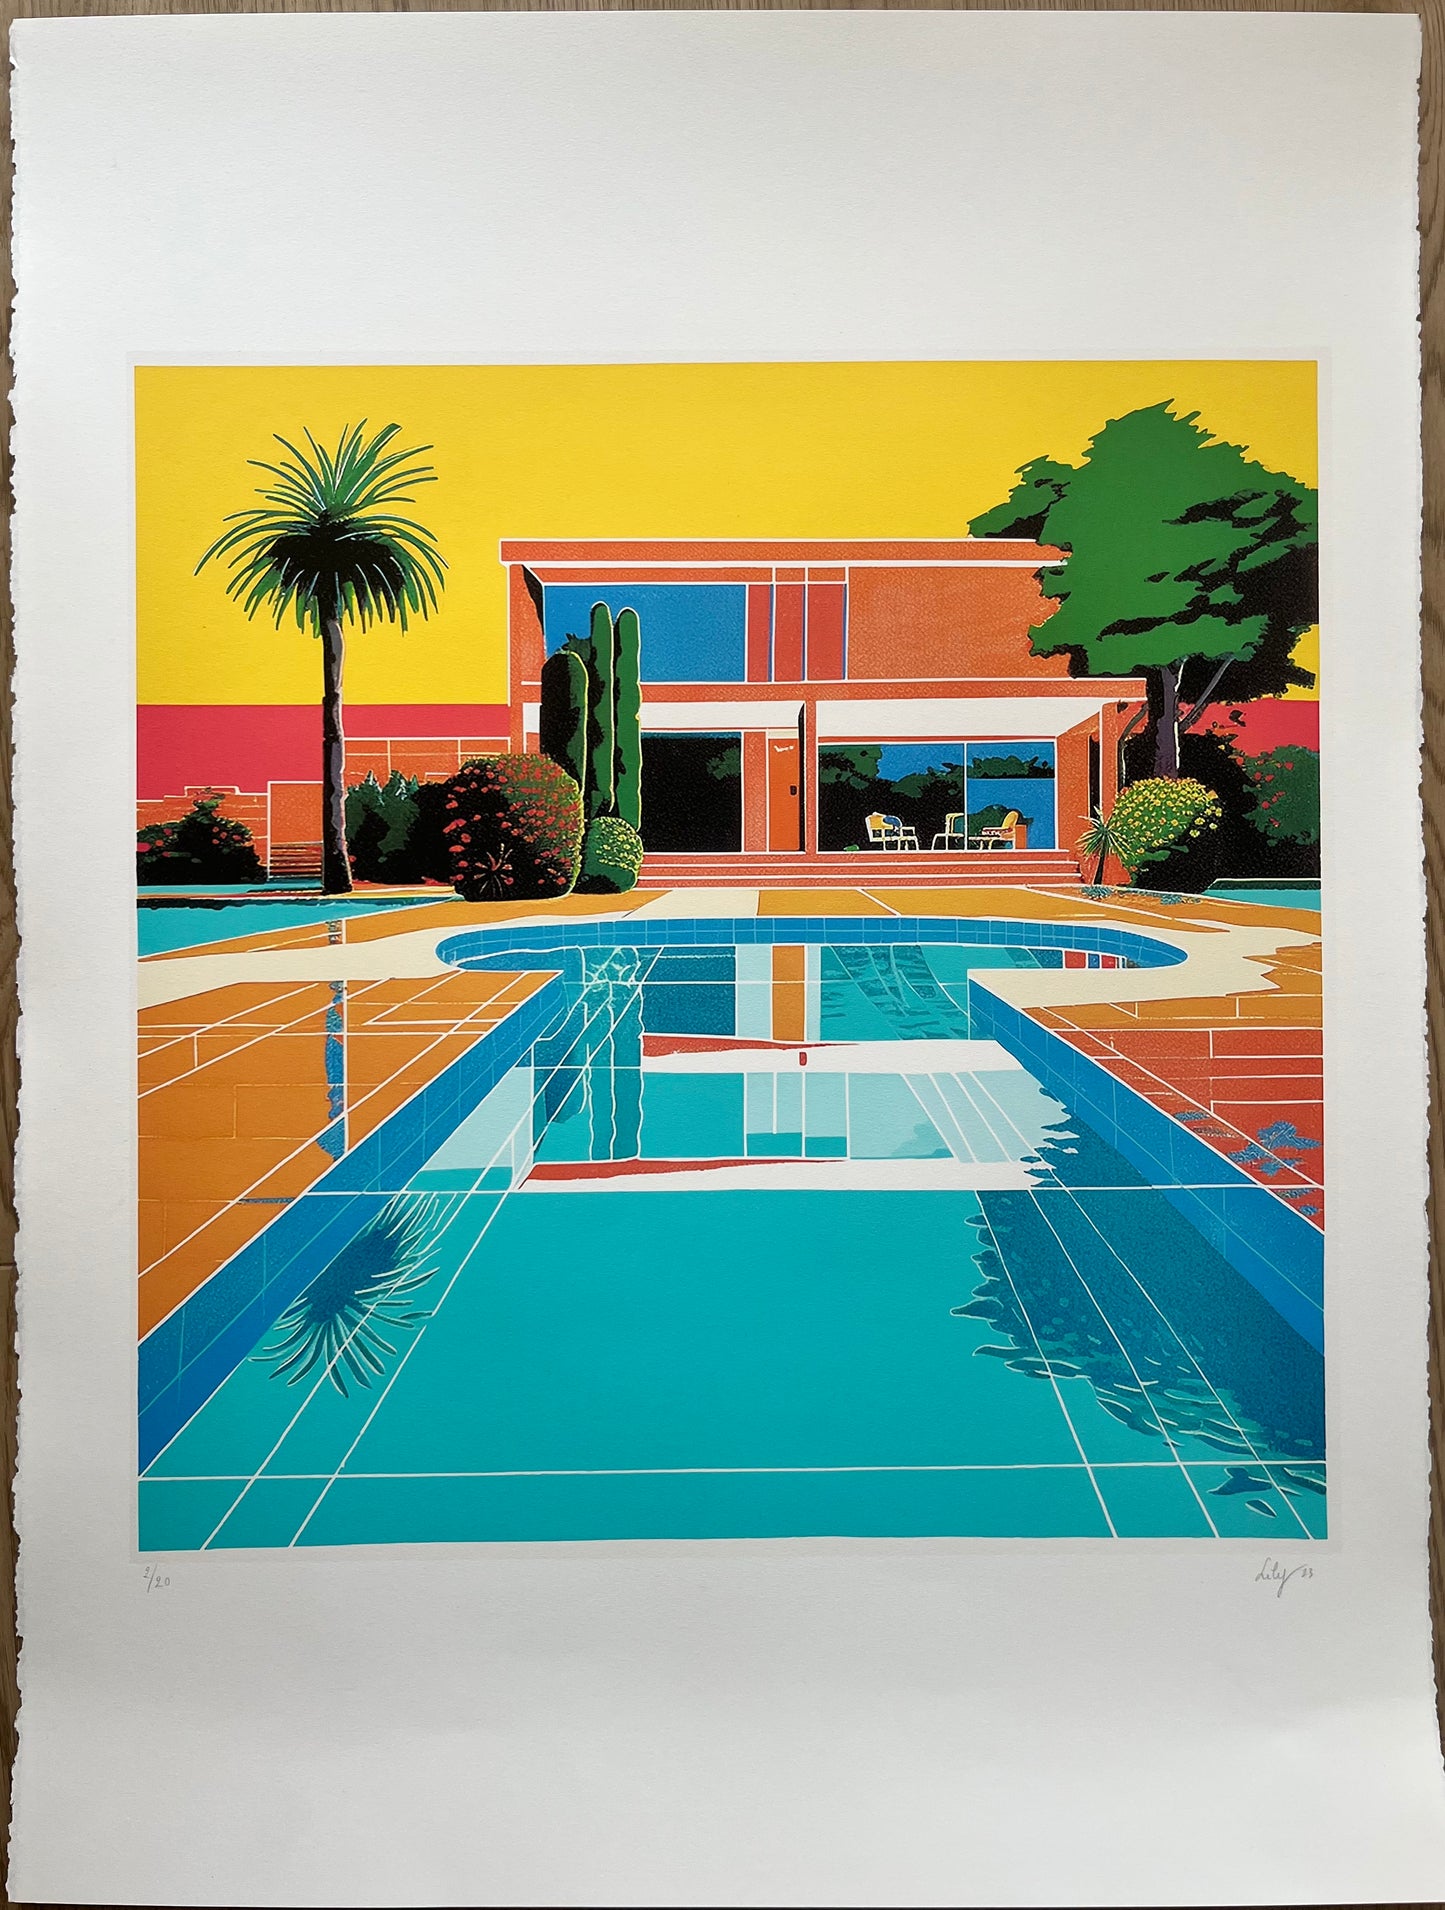 Lily ycf. California Dream - Screenprint Exclusively on LYNART Store